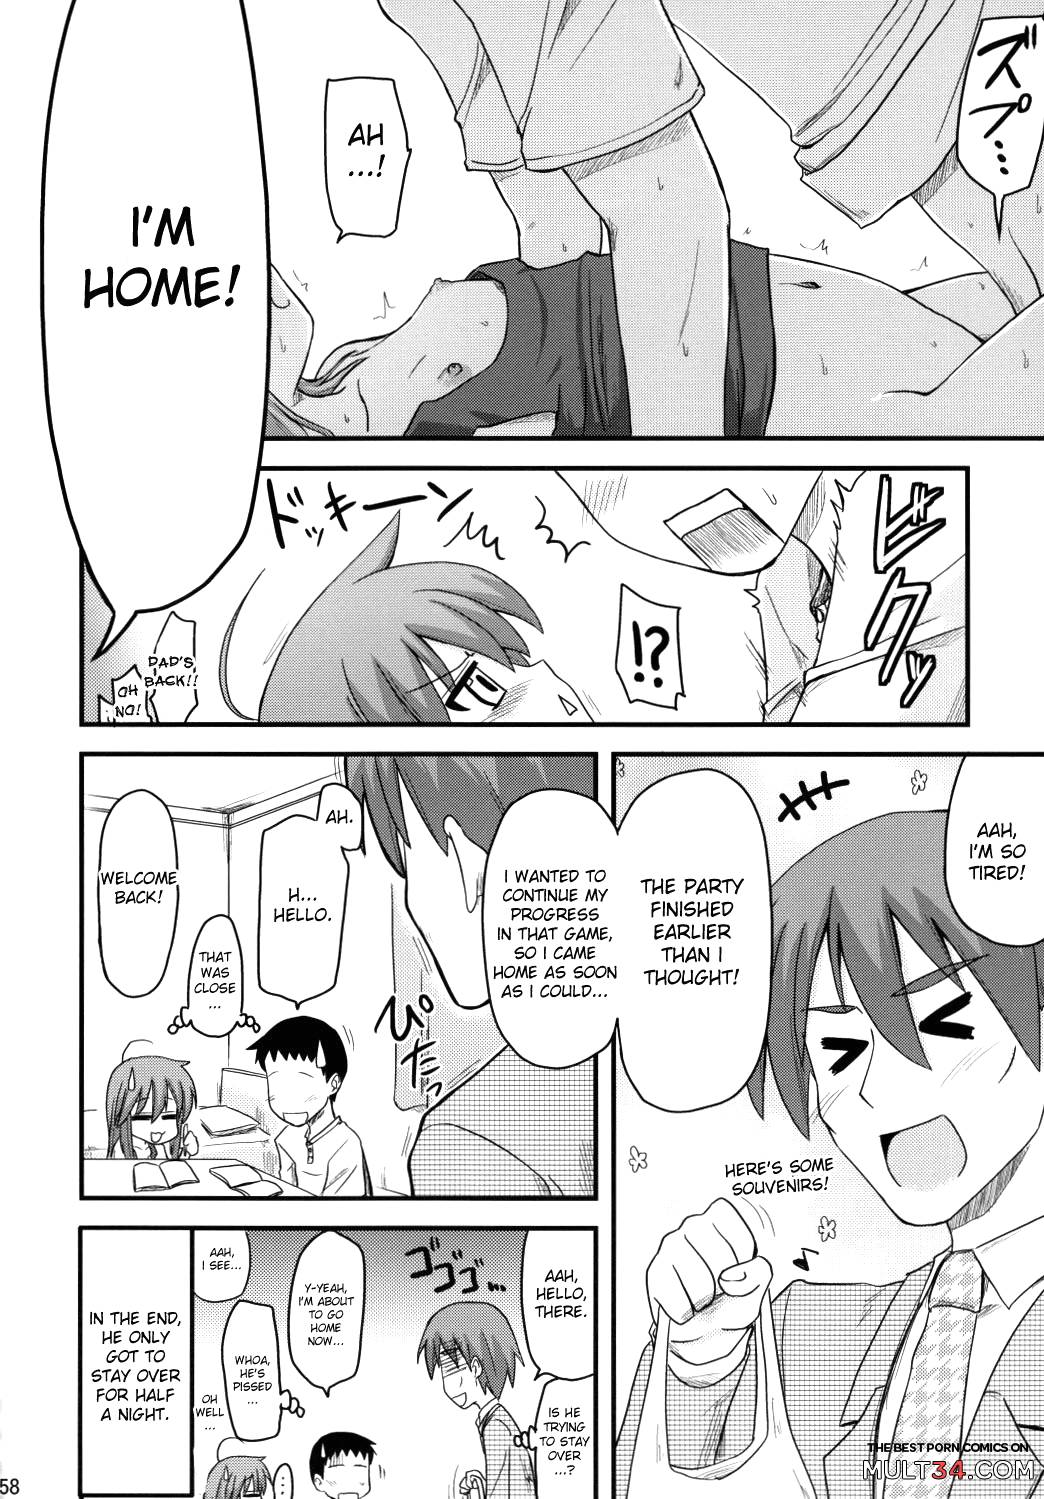 Konata and Oh-zu 4 people each and every one + 1 page 54